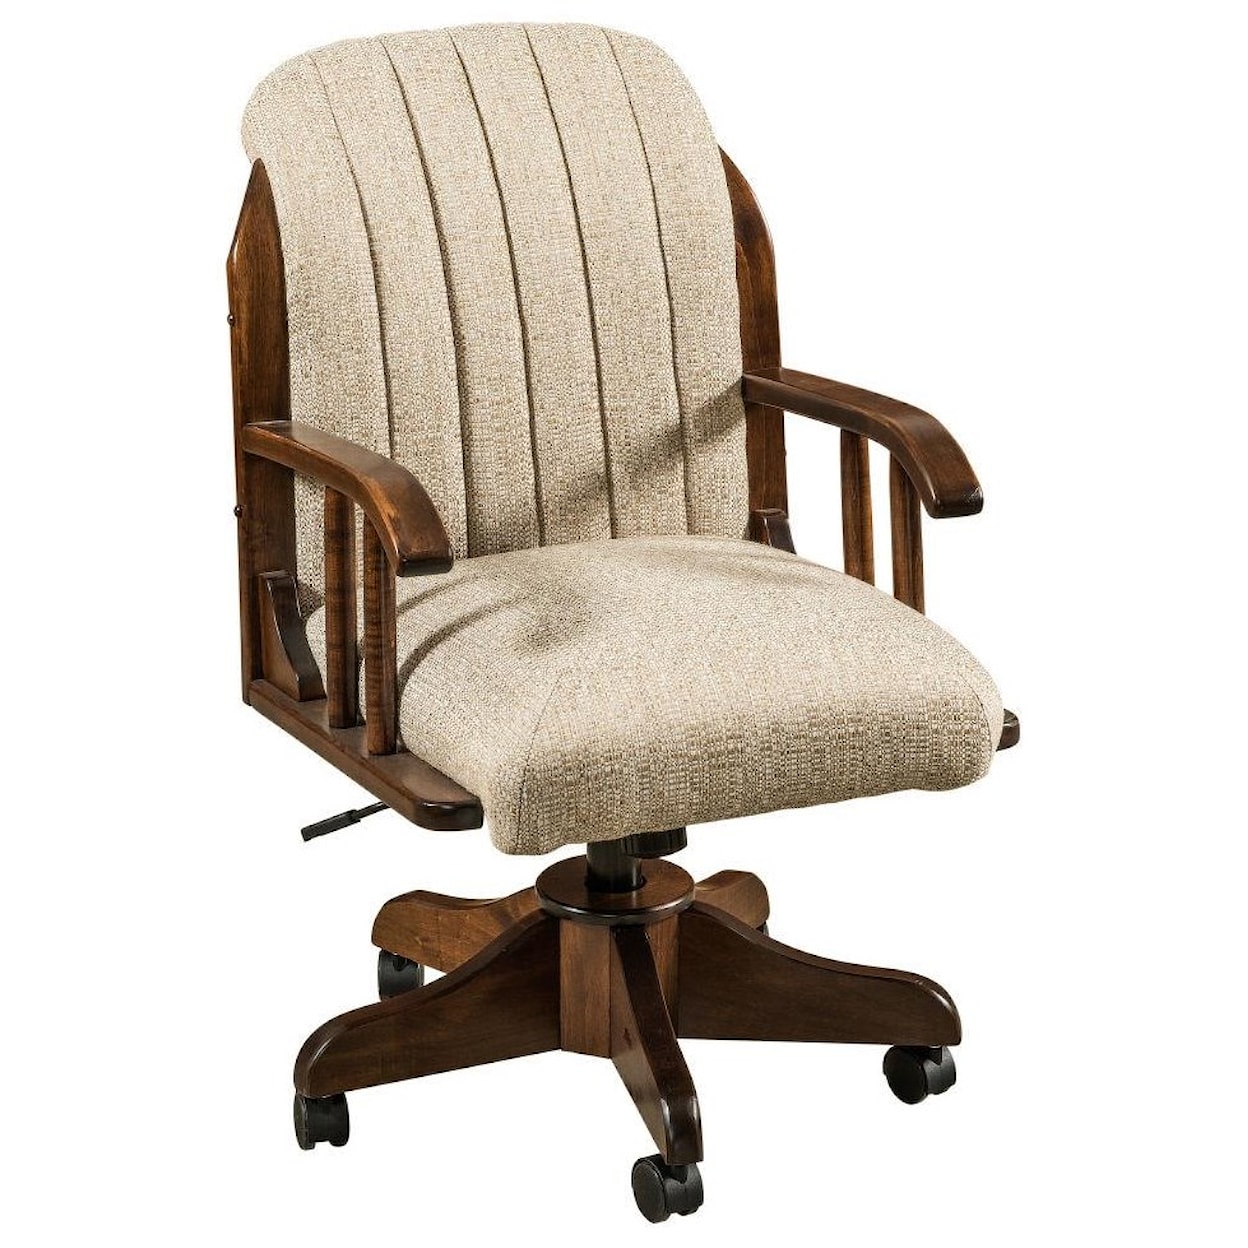 F&N Woodworking Delray Desk Chair